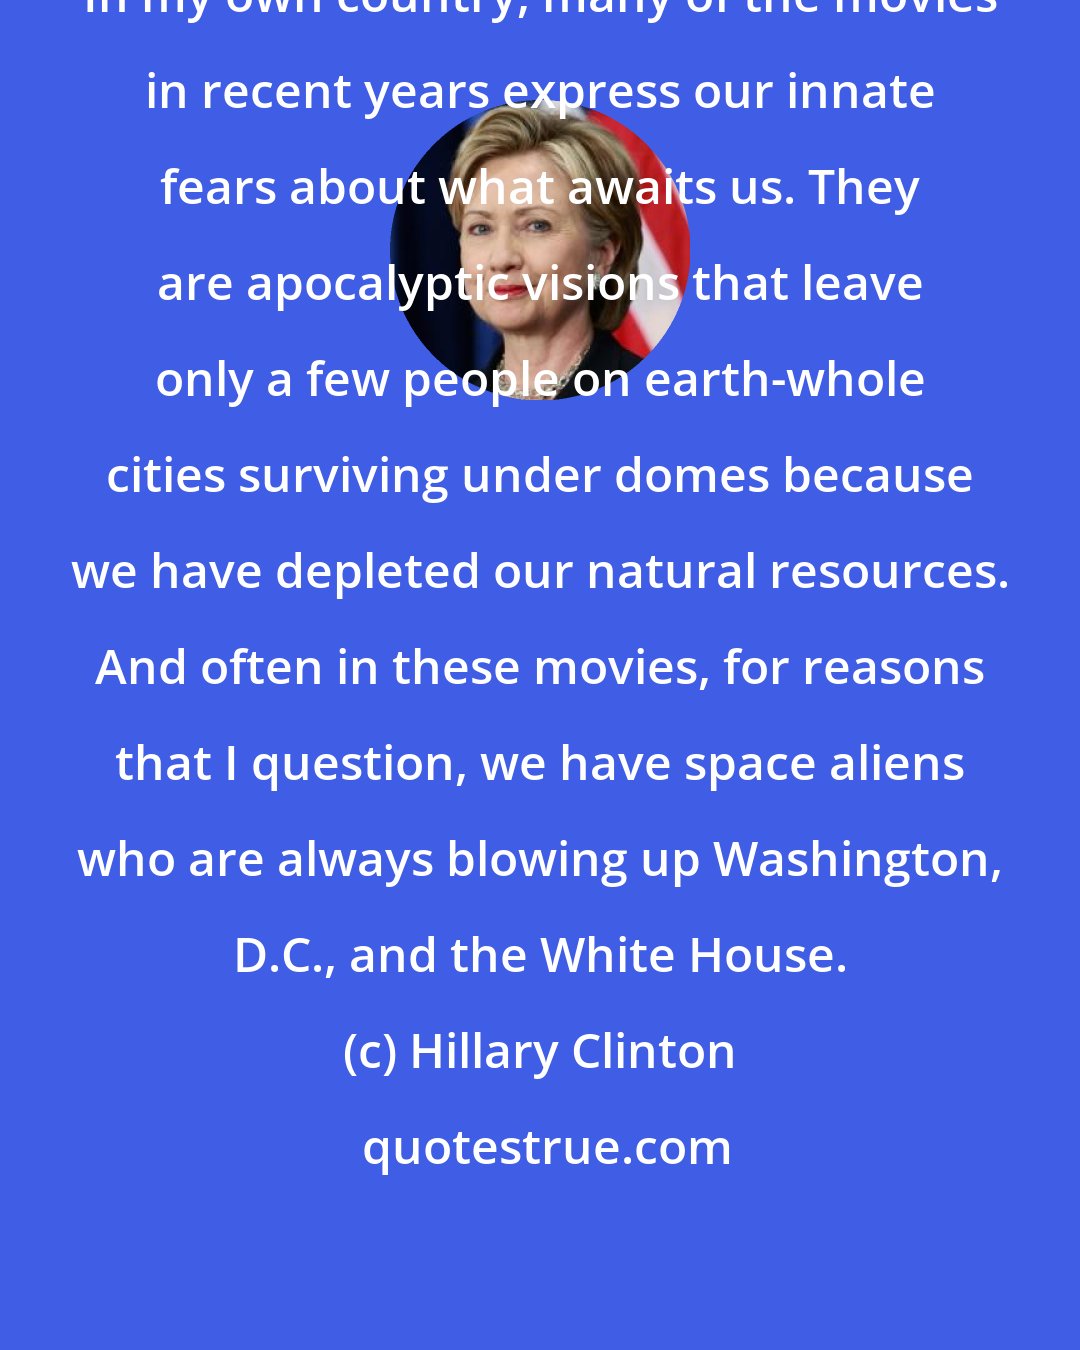 Hillary Clinton: In my own country, many of the movies in recent years express our innate fears about what awaits us. They are apocalyptic visions that leave only a few people on earth-whole cities surviving under domes because we have depleted our natural resources. And often in these movies, for reasons that I question, we have space aliens who are always blowing up Washington, D.C., and the White House.